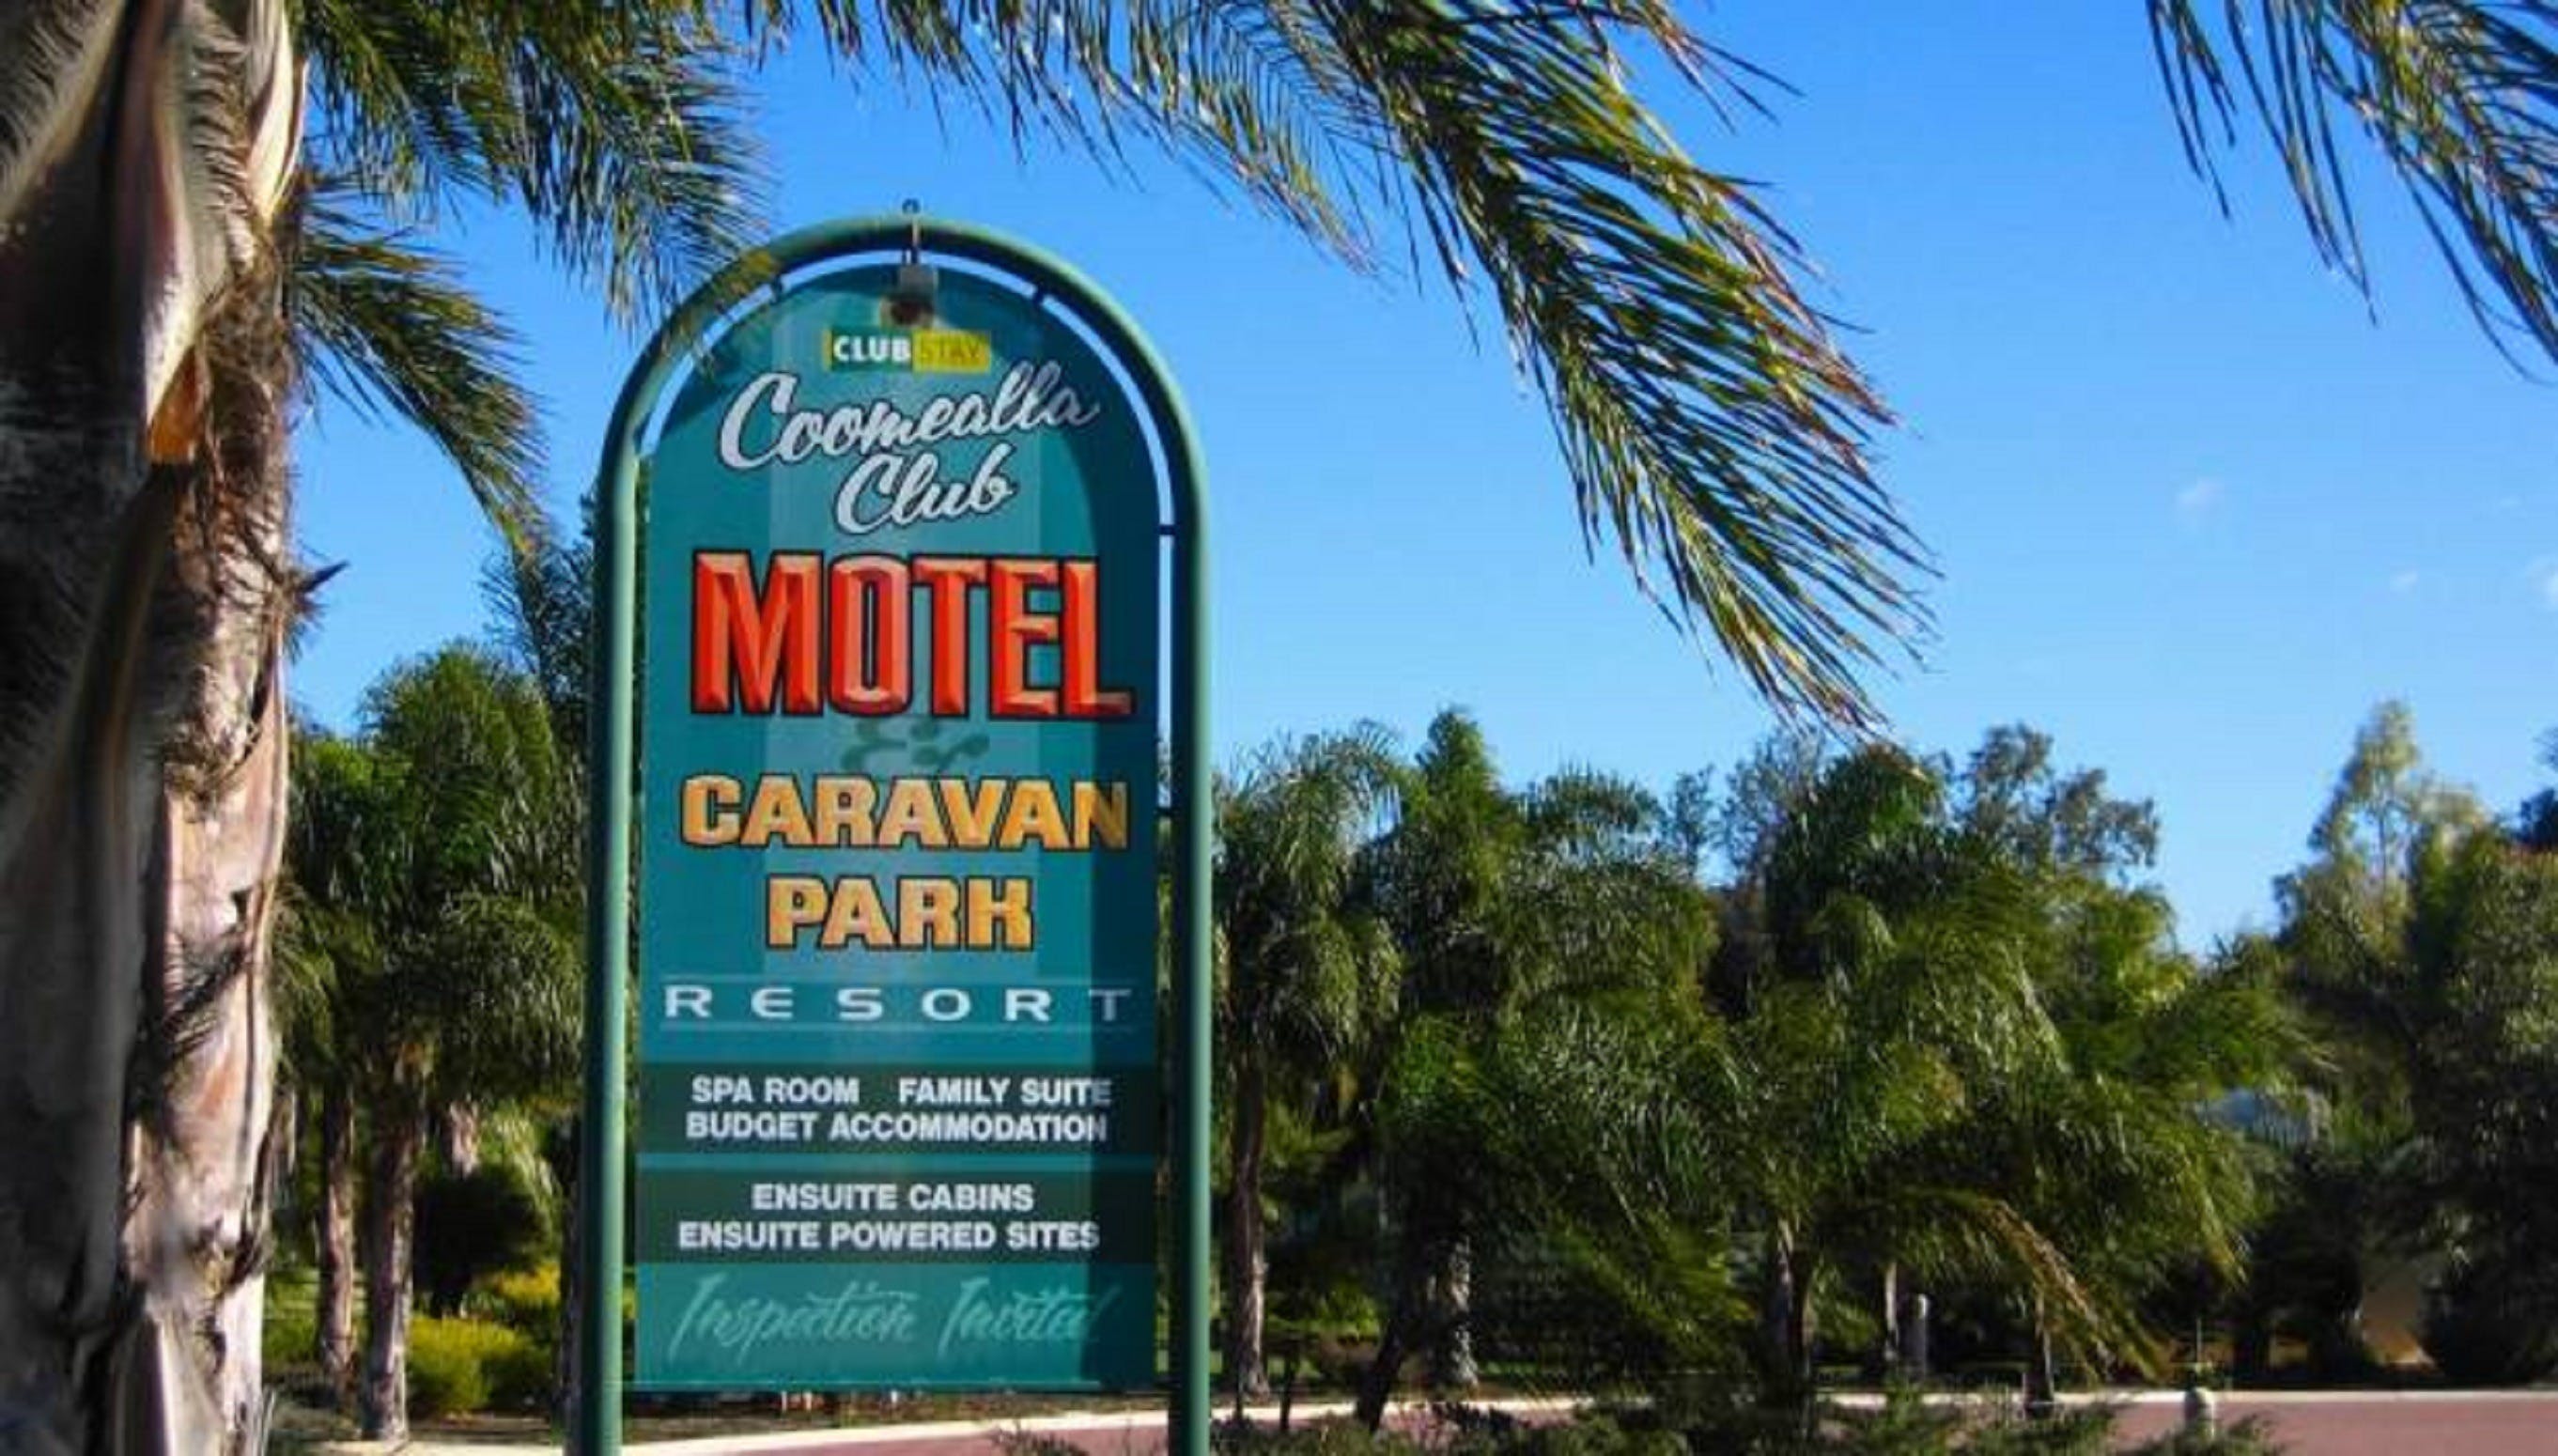 Coomealla Club Motel and Caravan Park Resort - Dalby Accommodation